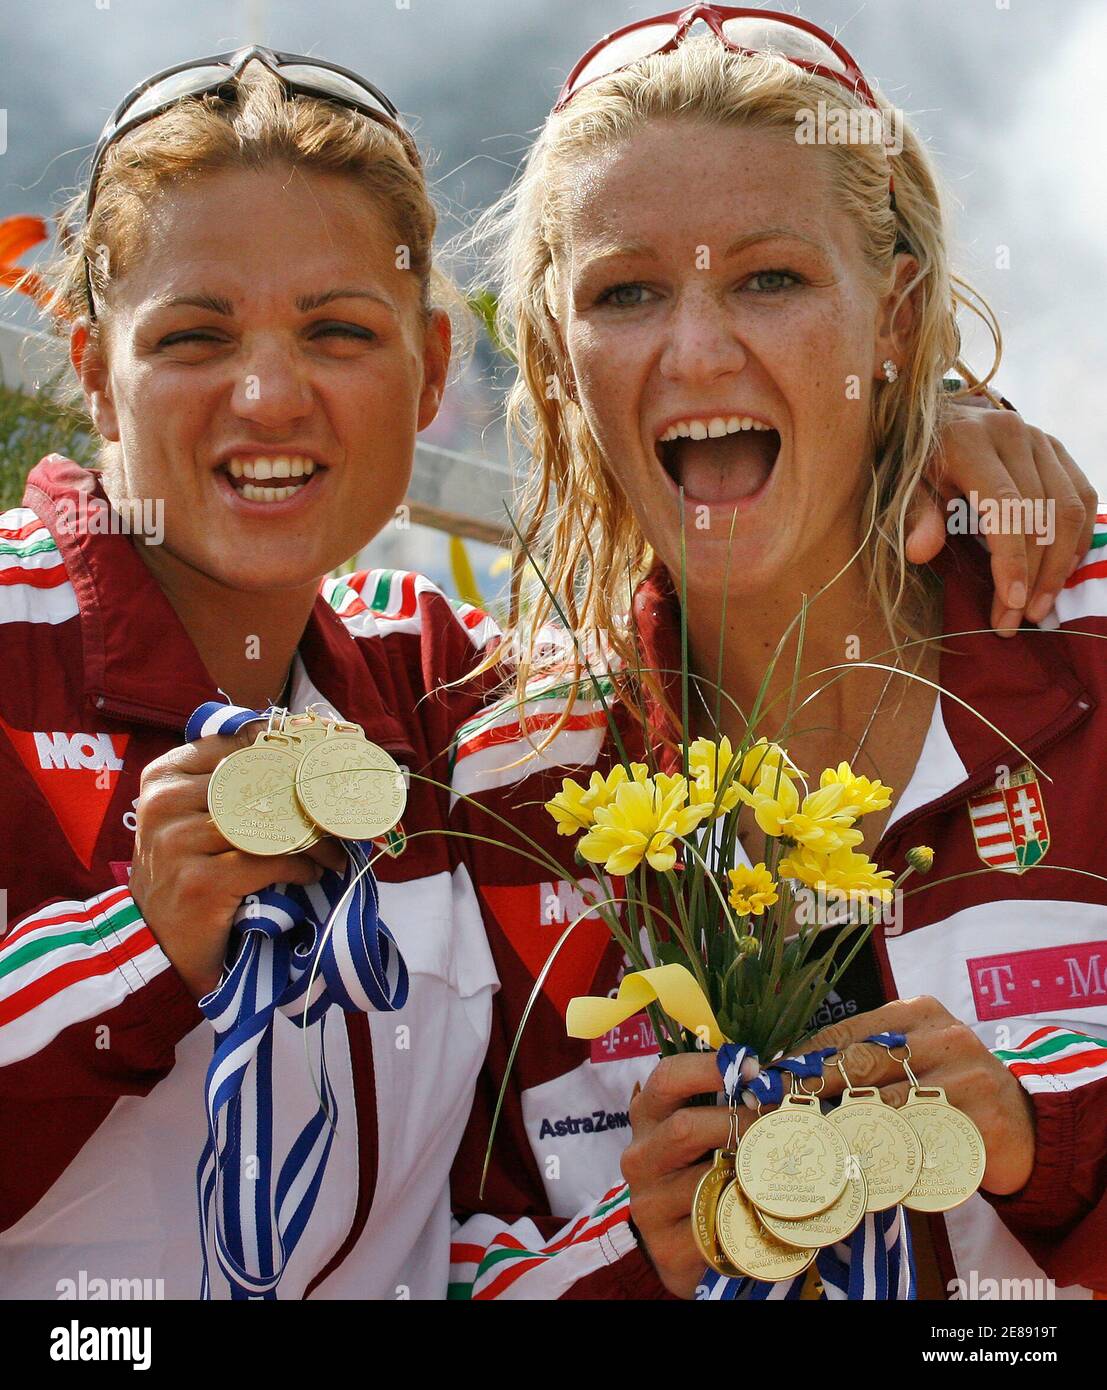 Katalin Kovacs and Natasa Janics of Hungary show off the gold medals they gained during the European Flatwater Championships in the central Bohemian village of Racice, Czech Republic, July 9, 2006.                REUTERS/Petr Josek   (CZECH REPUBLIC) Stock Photo